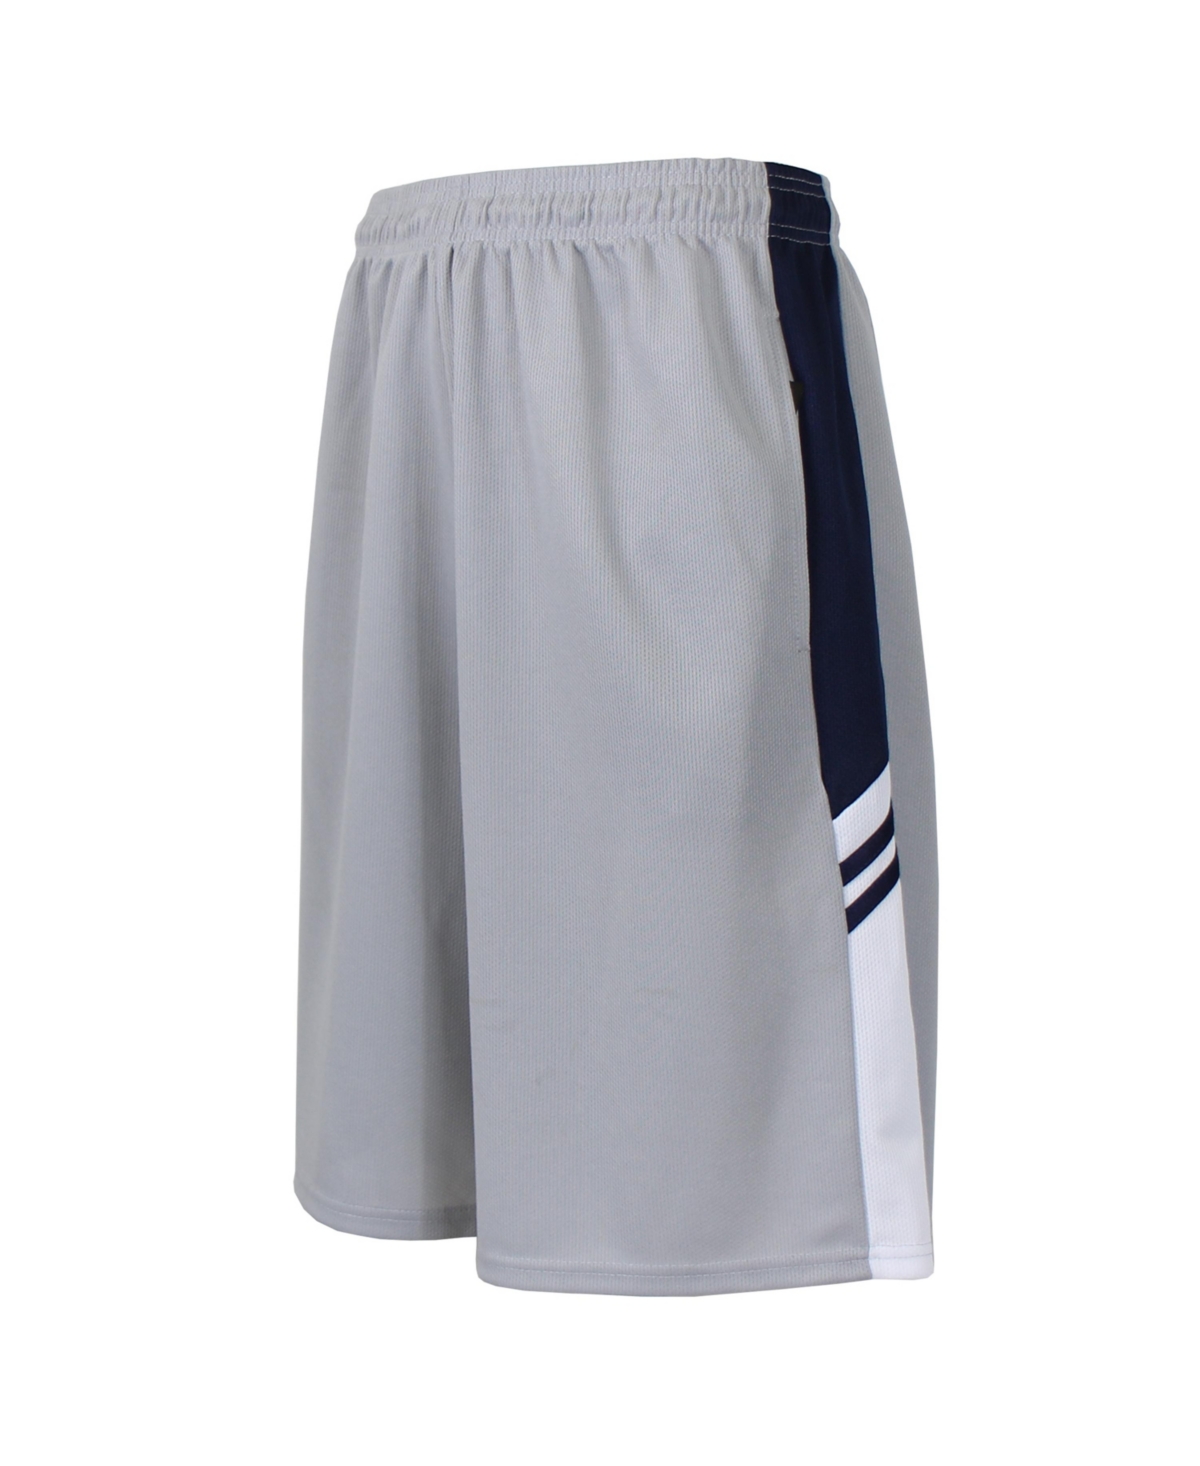 Galaxy By Harvic Men's Moisture Wicking Shorts With Side Trim Design In Silver-tone